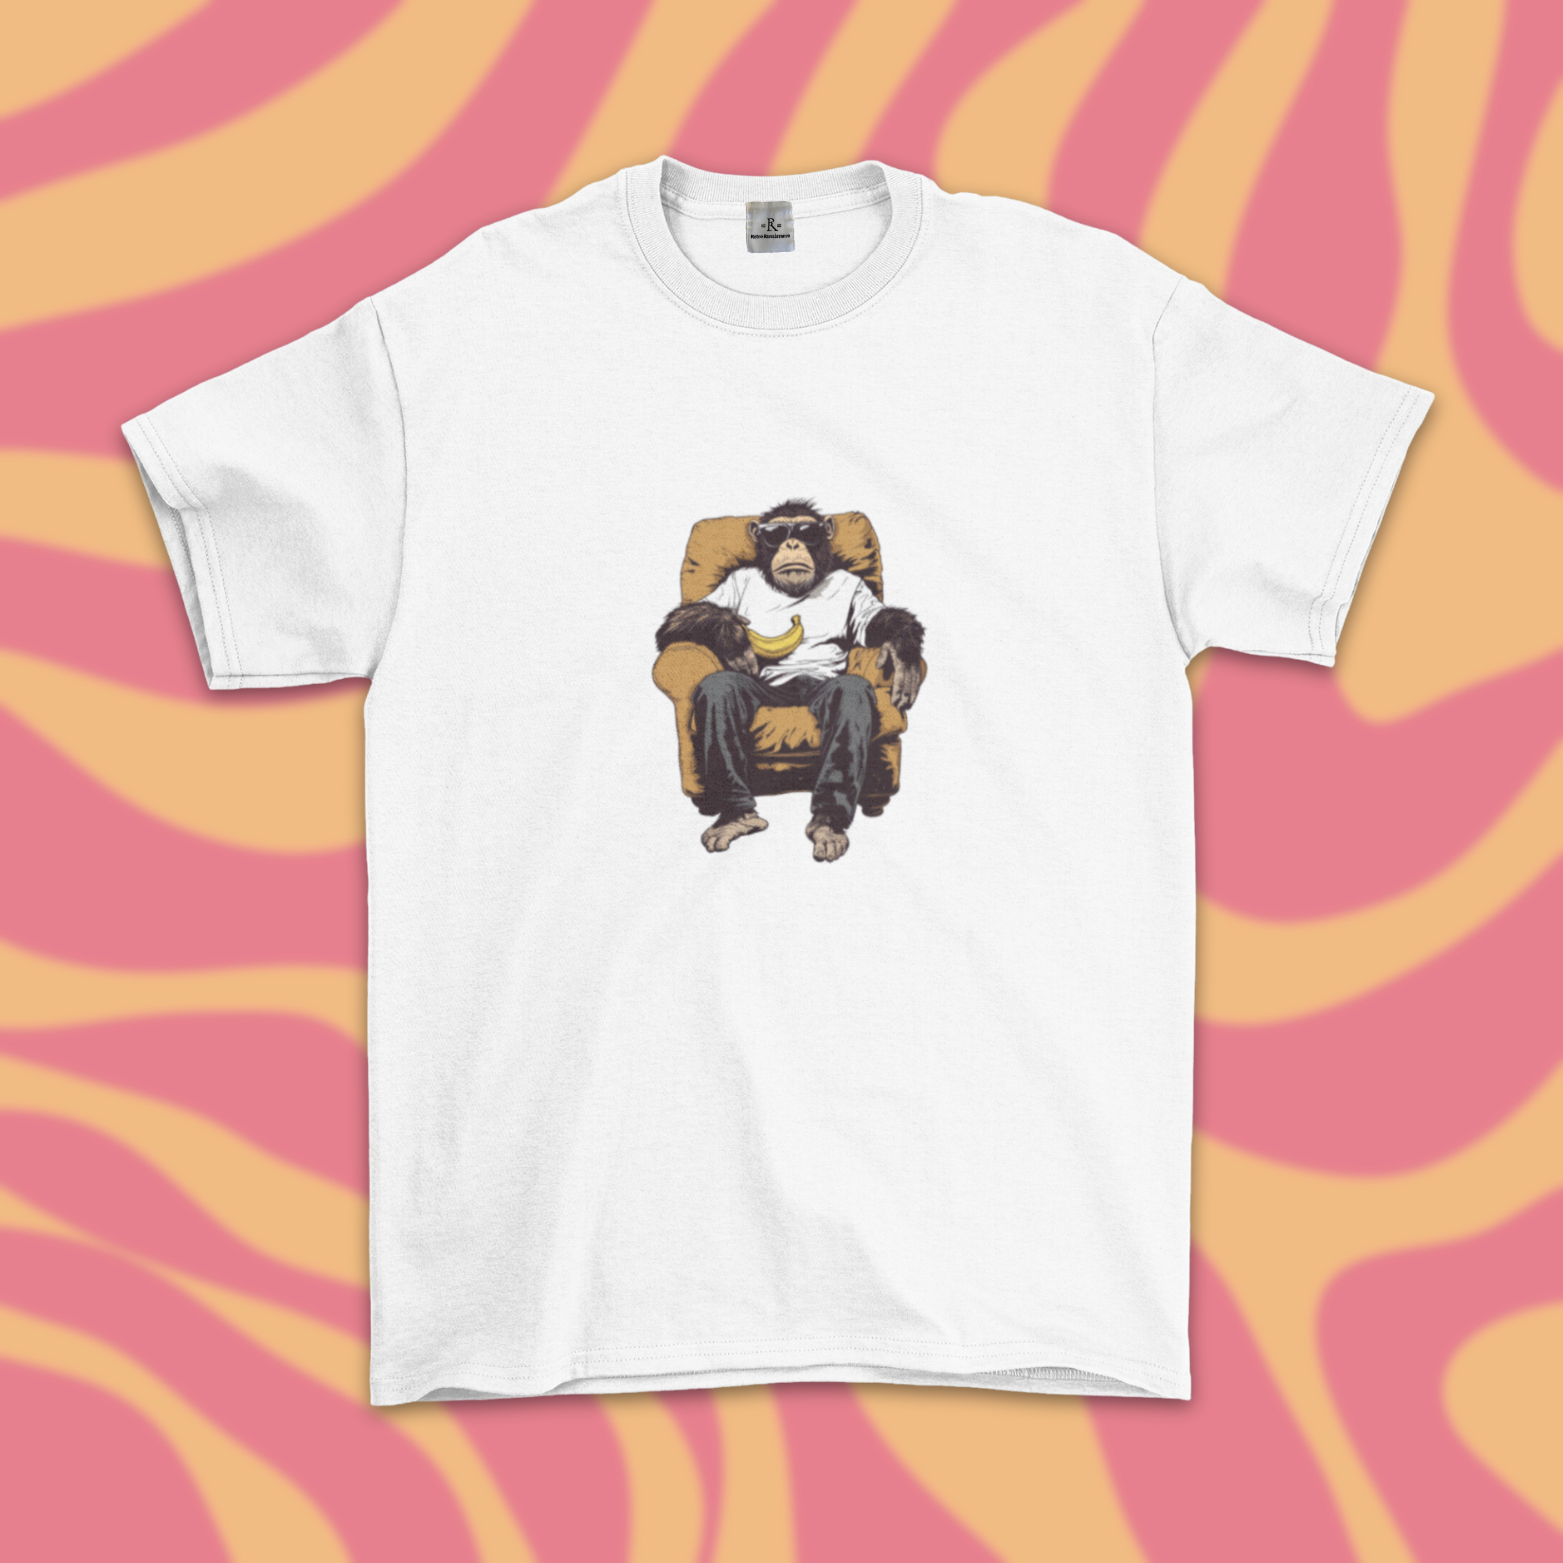 Retro Style Graphic Tee, Chilled-Out Chimp